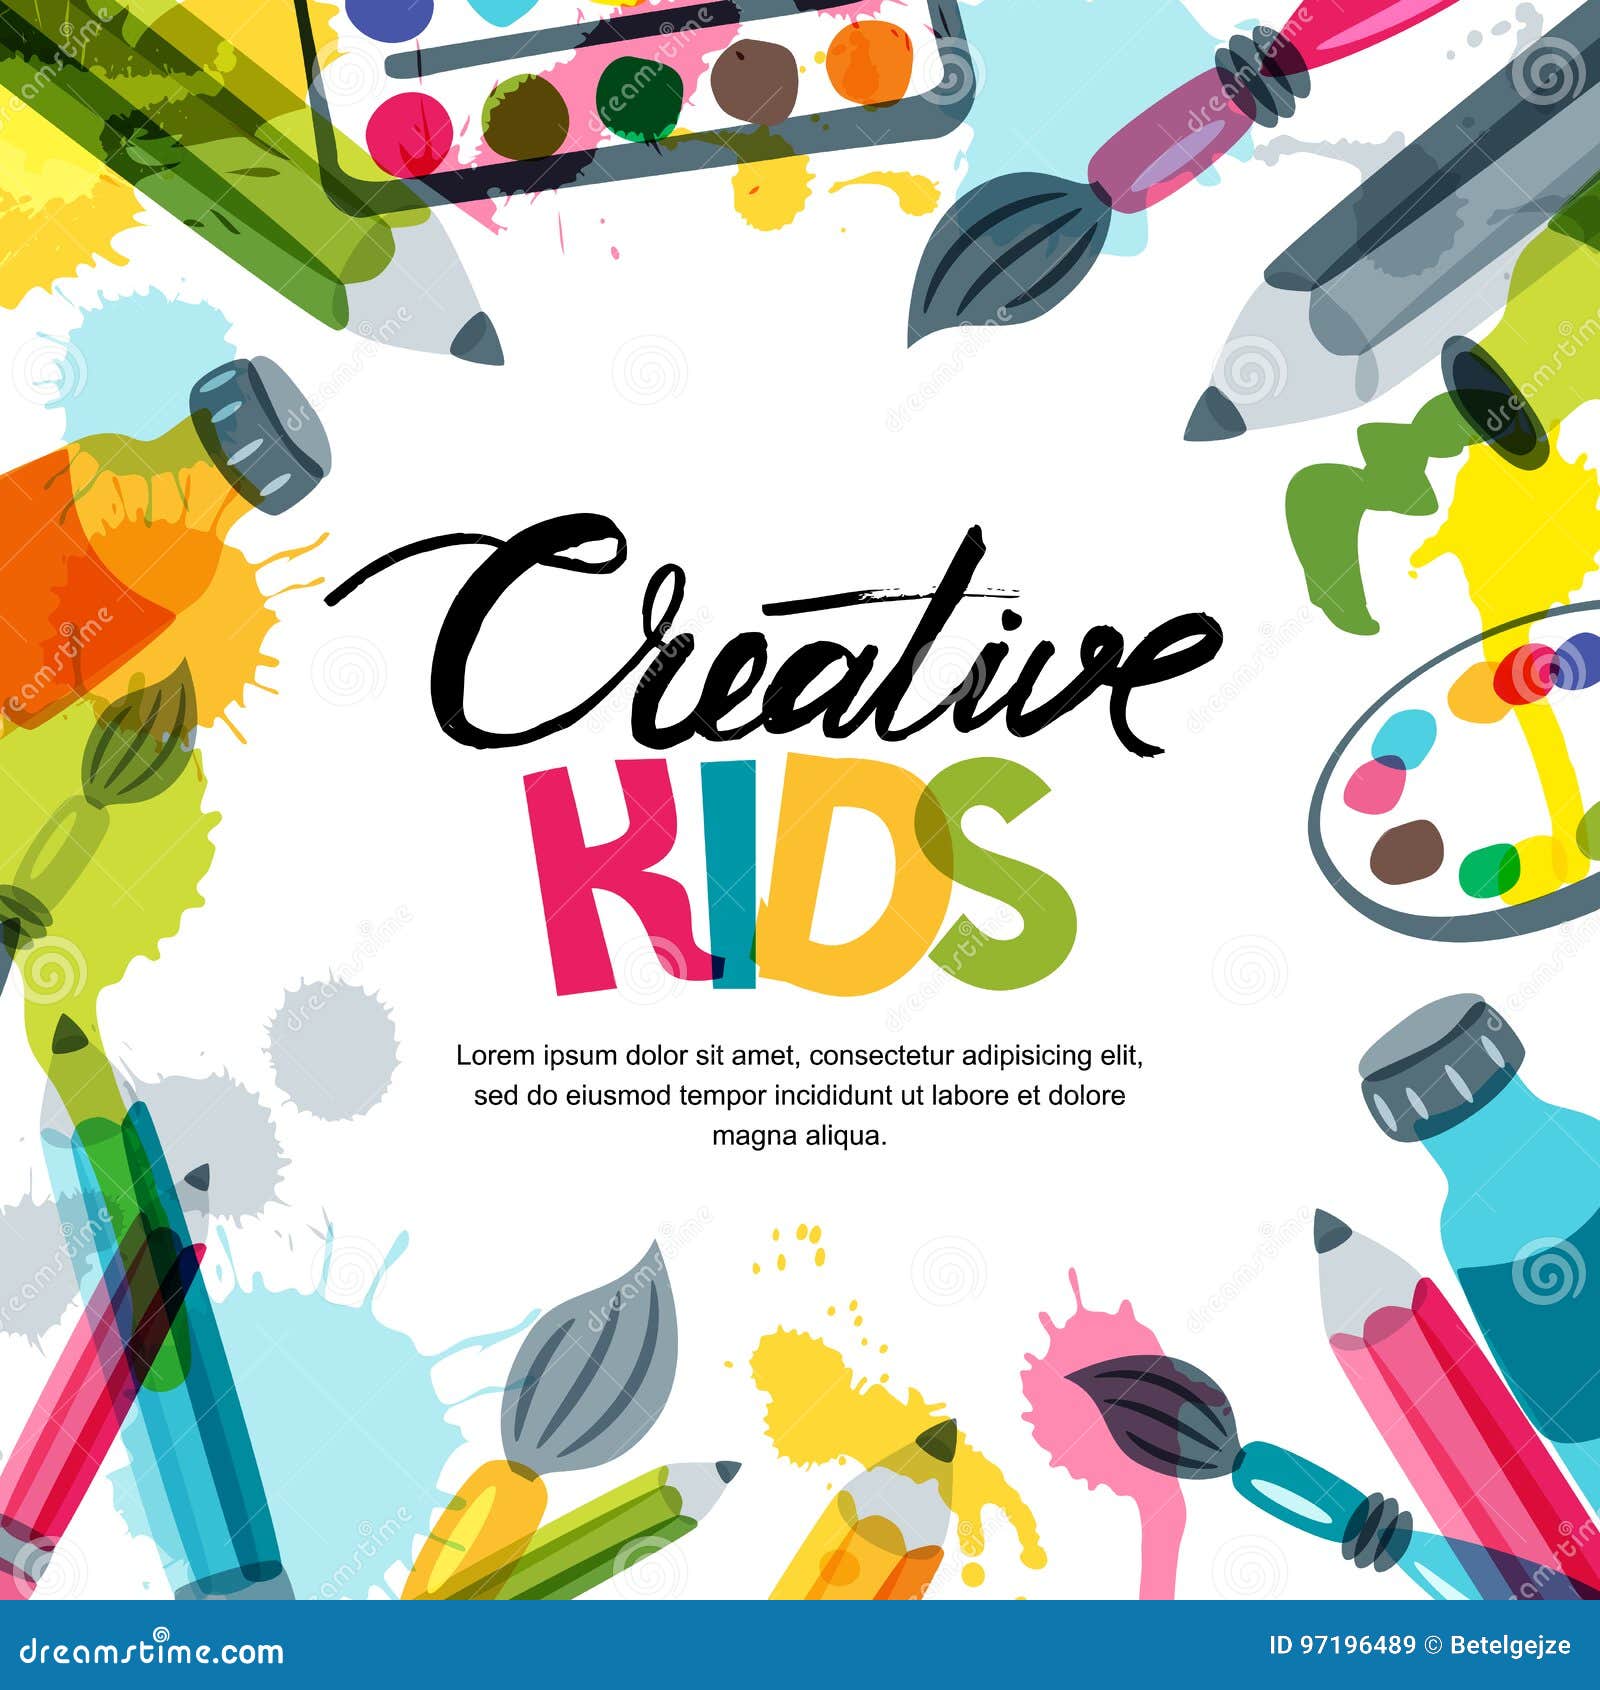 kids art, education, creativity class concept.  banner, poster background with calligraphy, pencil, brush, paints.